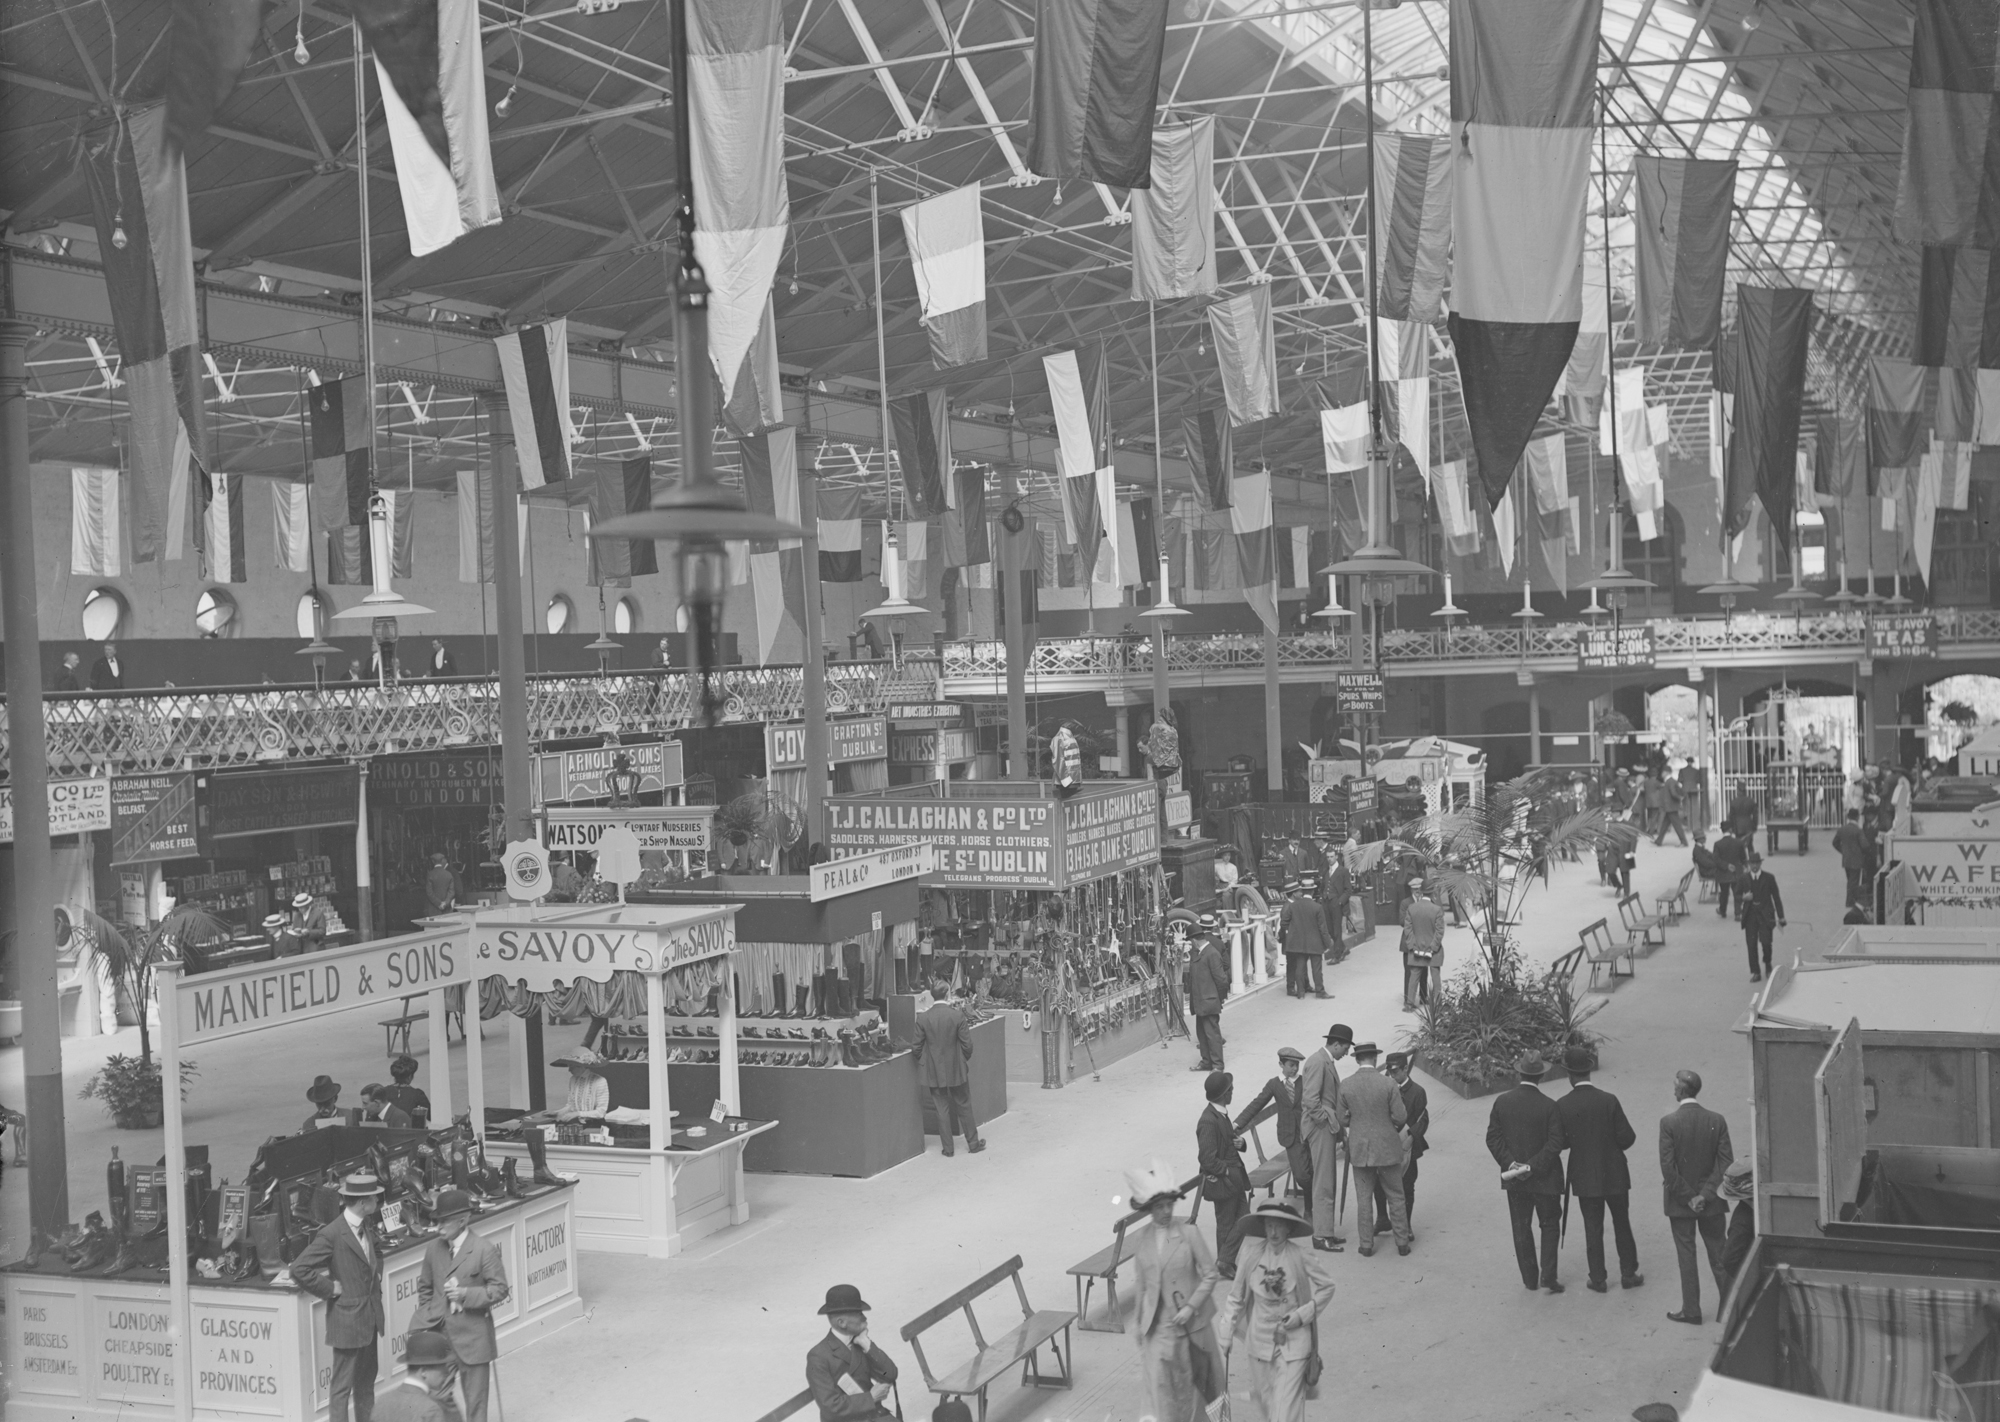 View of some of the Stalls at the Show, Ballsbridge, Co. Dublin